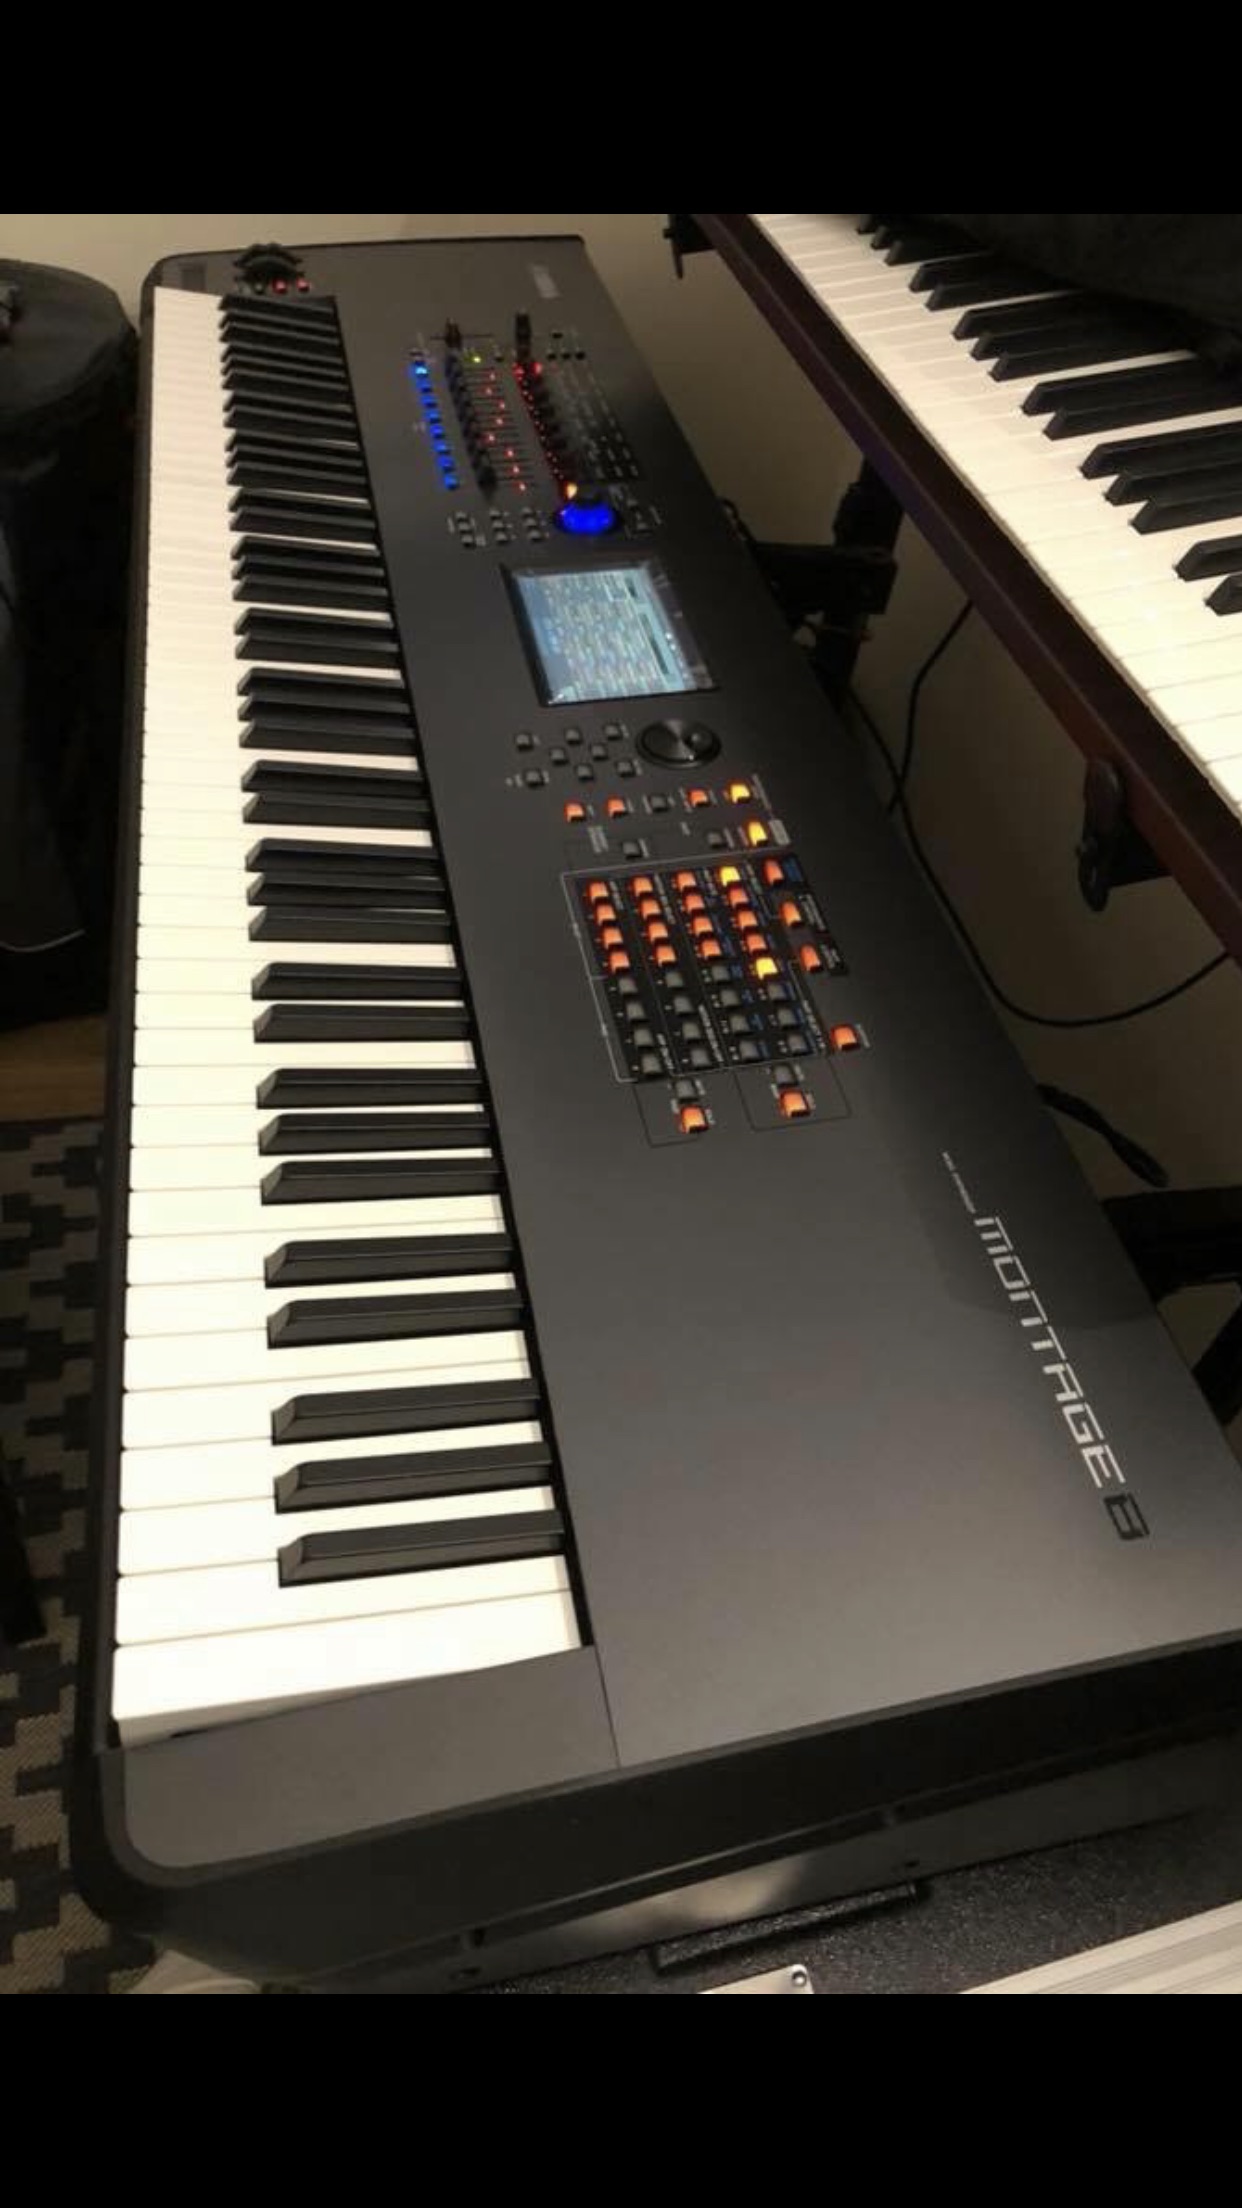 nord stage 3 vs yamaha montage 8